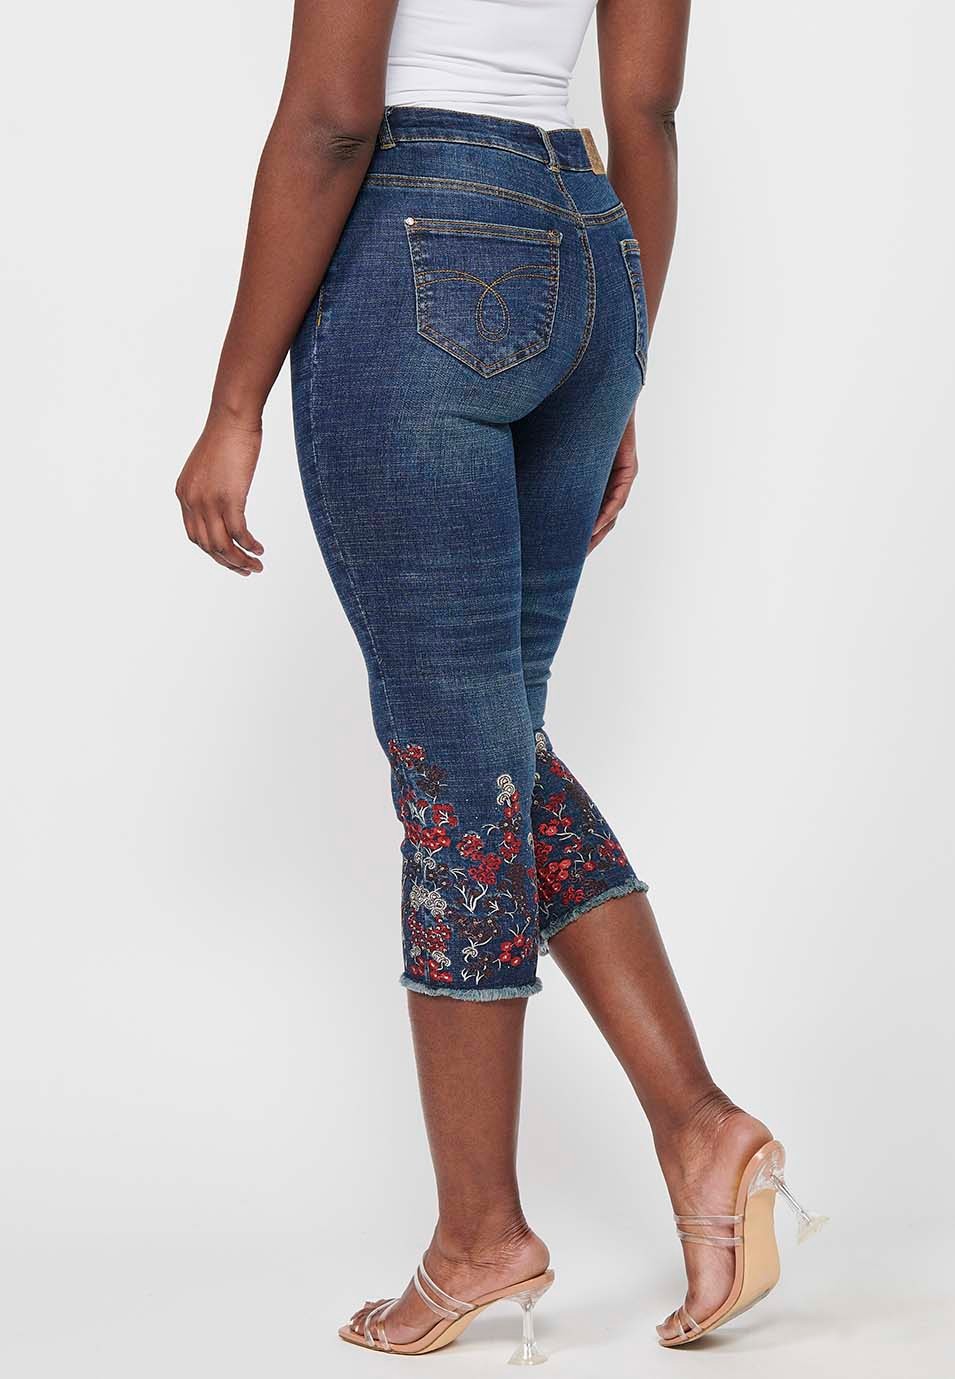 Pirate pants finished in floral embroidery, dark blue color for women